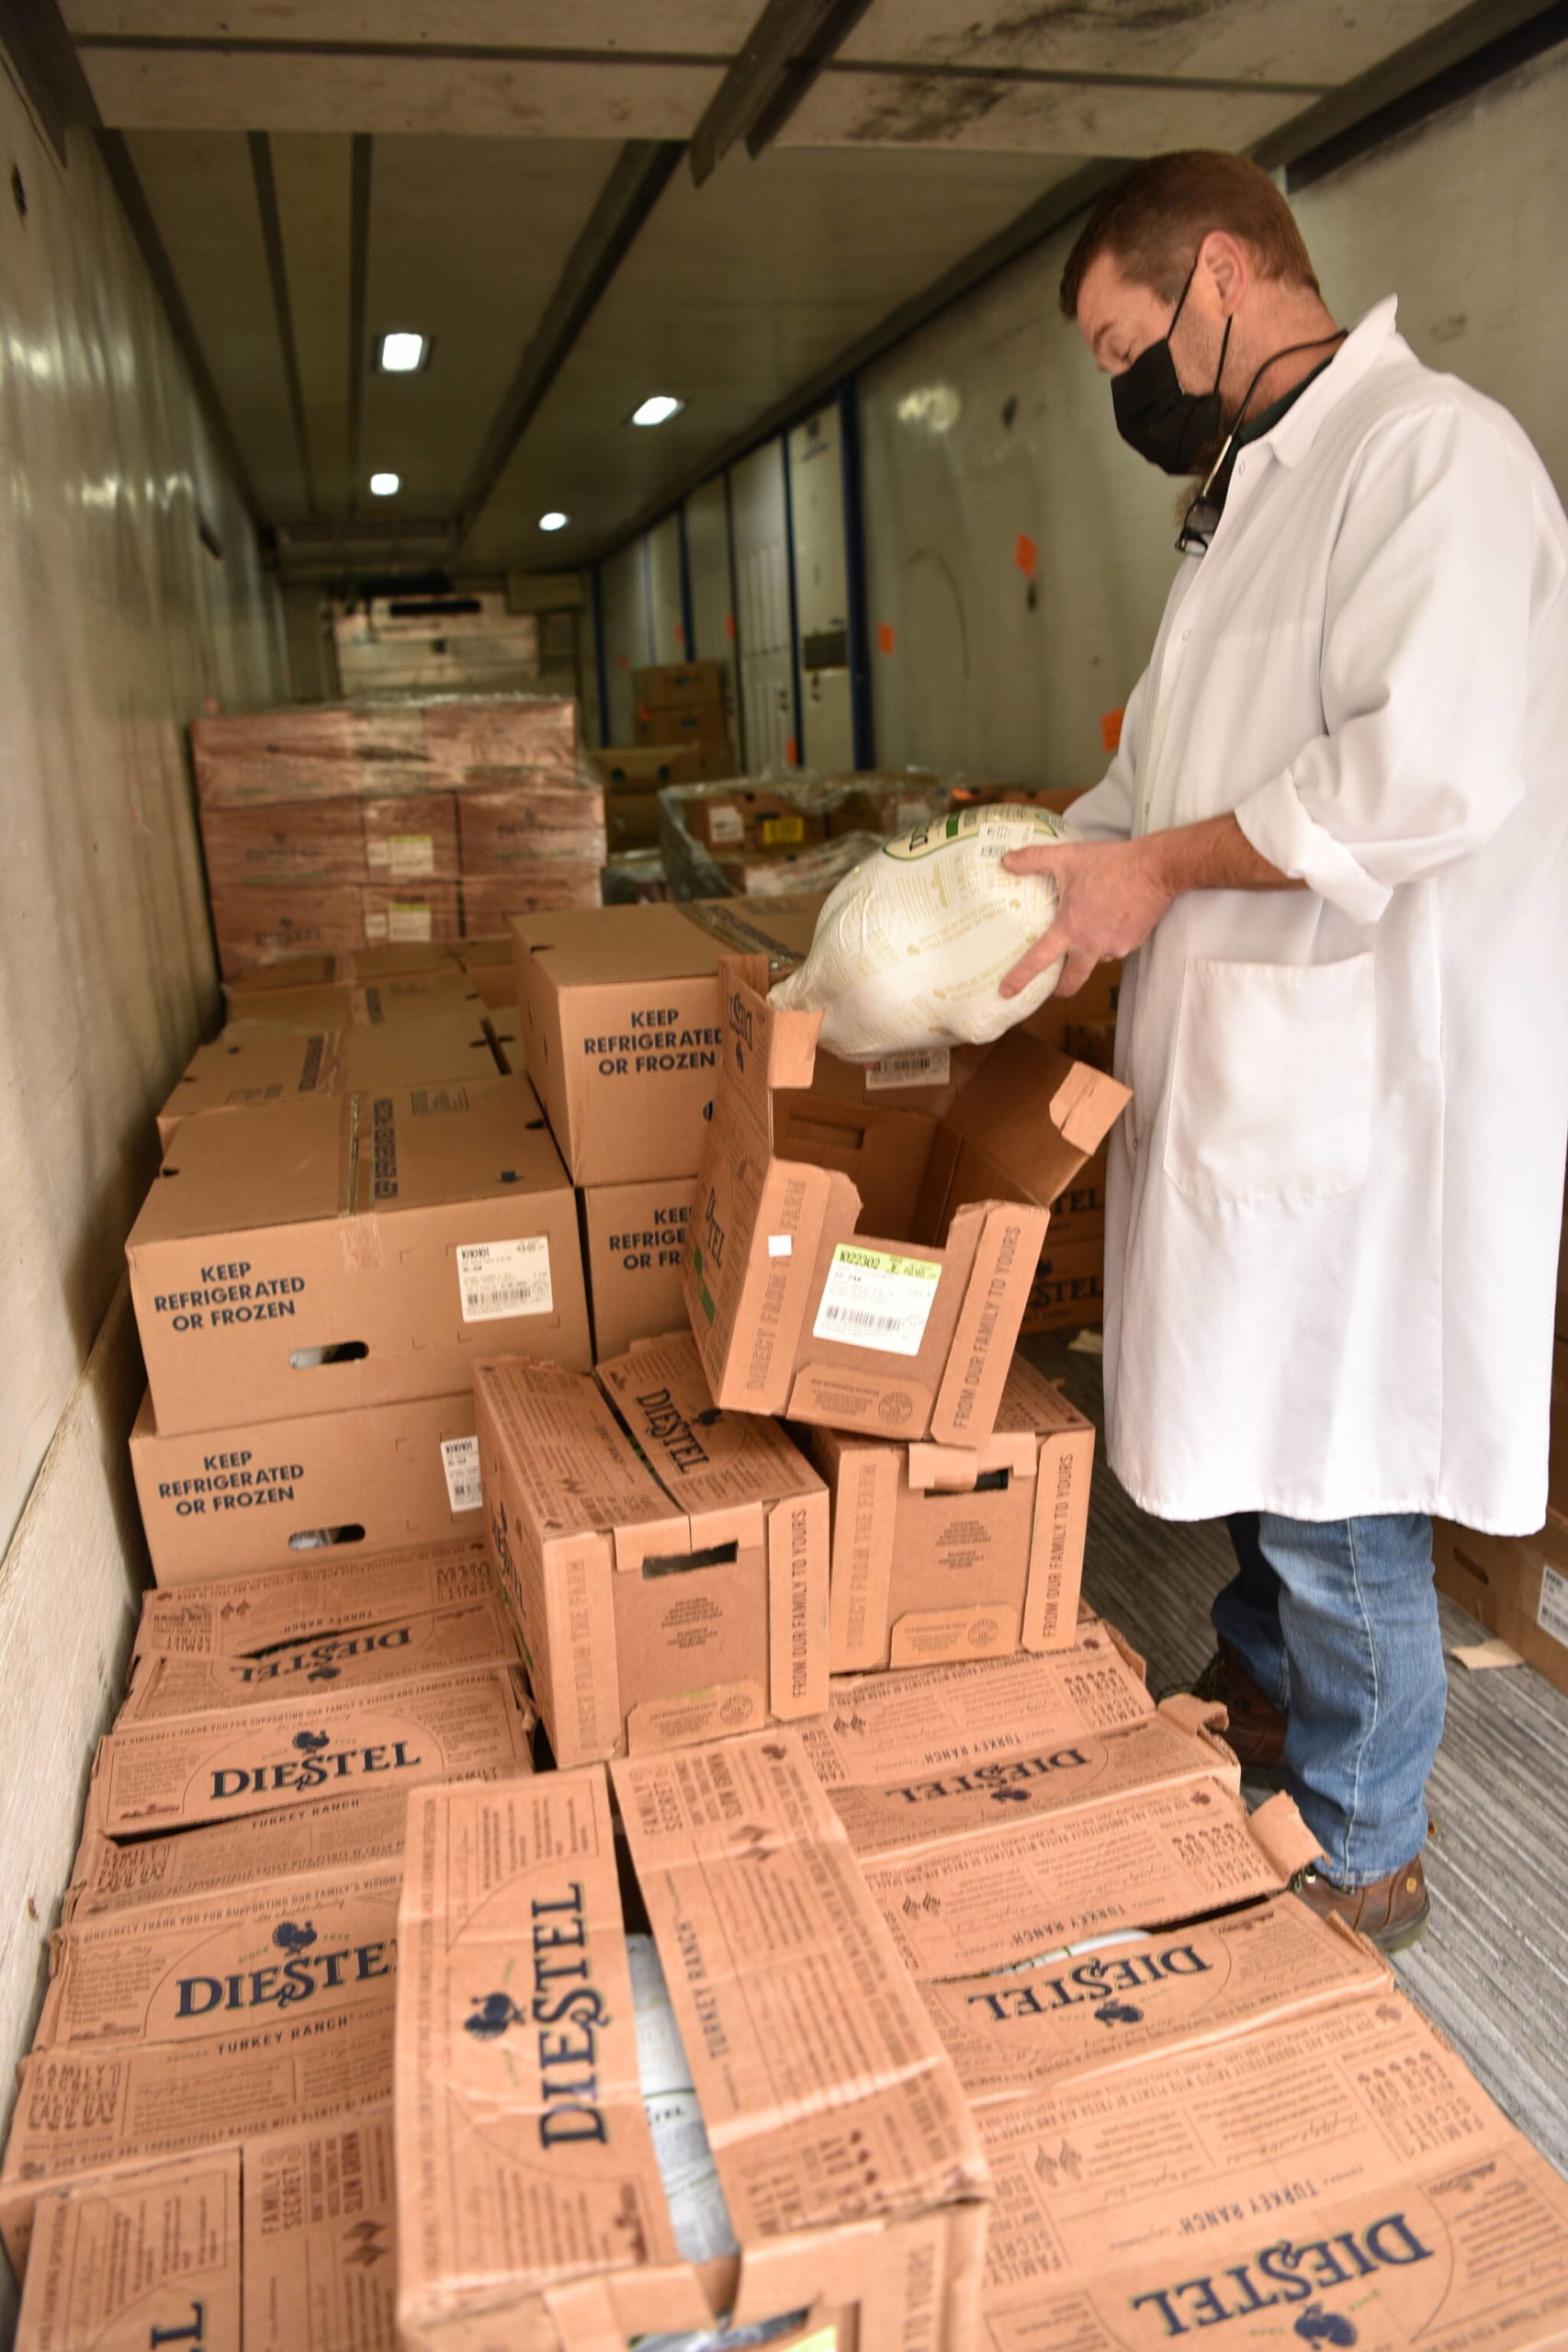 Town & Country meat department manager Tony Lane unboxes a frozen turkey in the "turkey truck" where some of the 1,071 whole turkeys and 324 turkey breasts were stored for Thanksgiving shoppers.